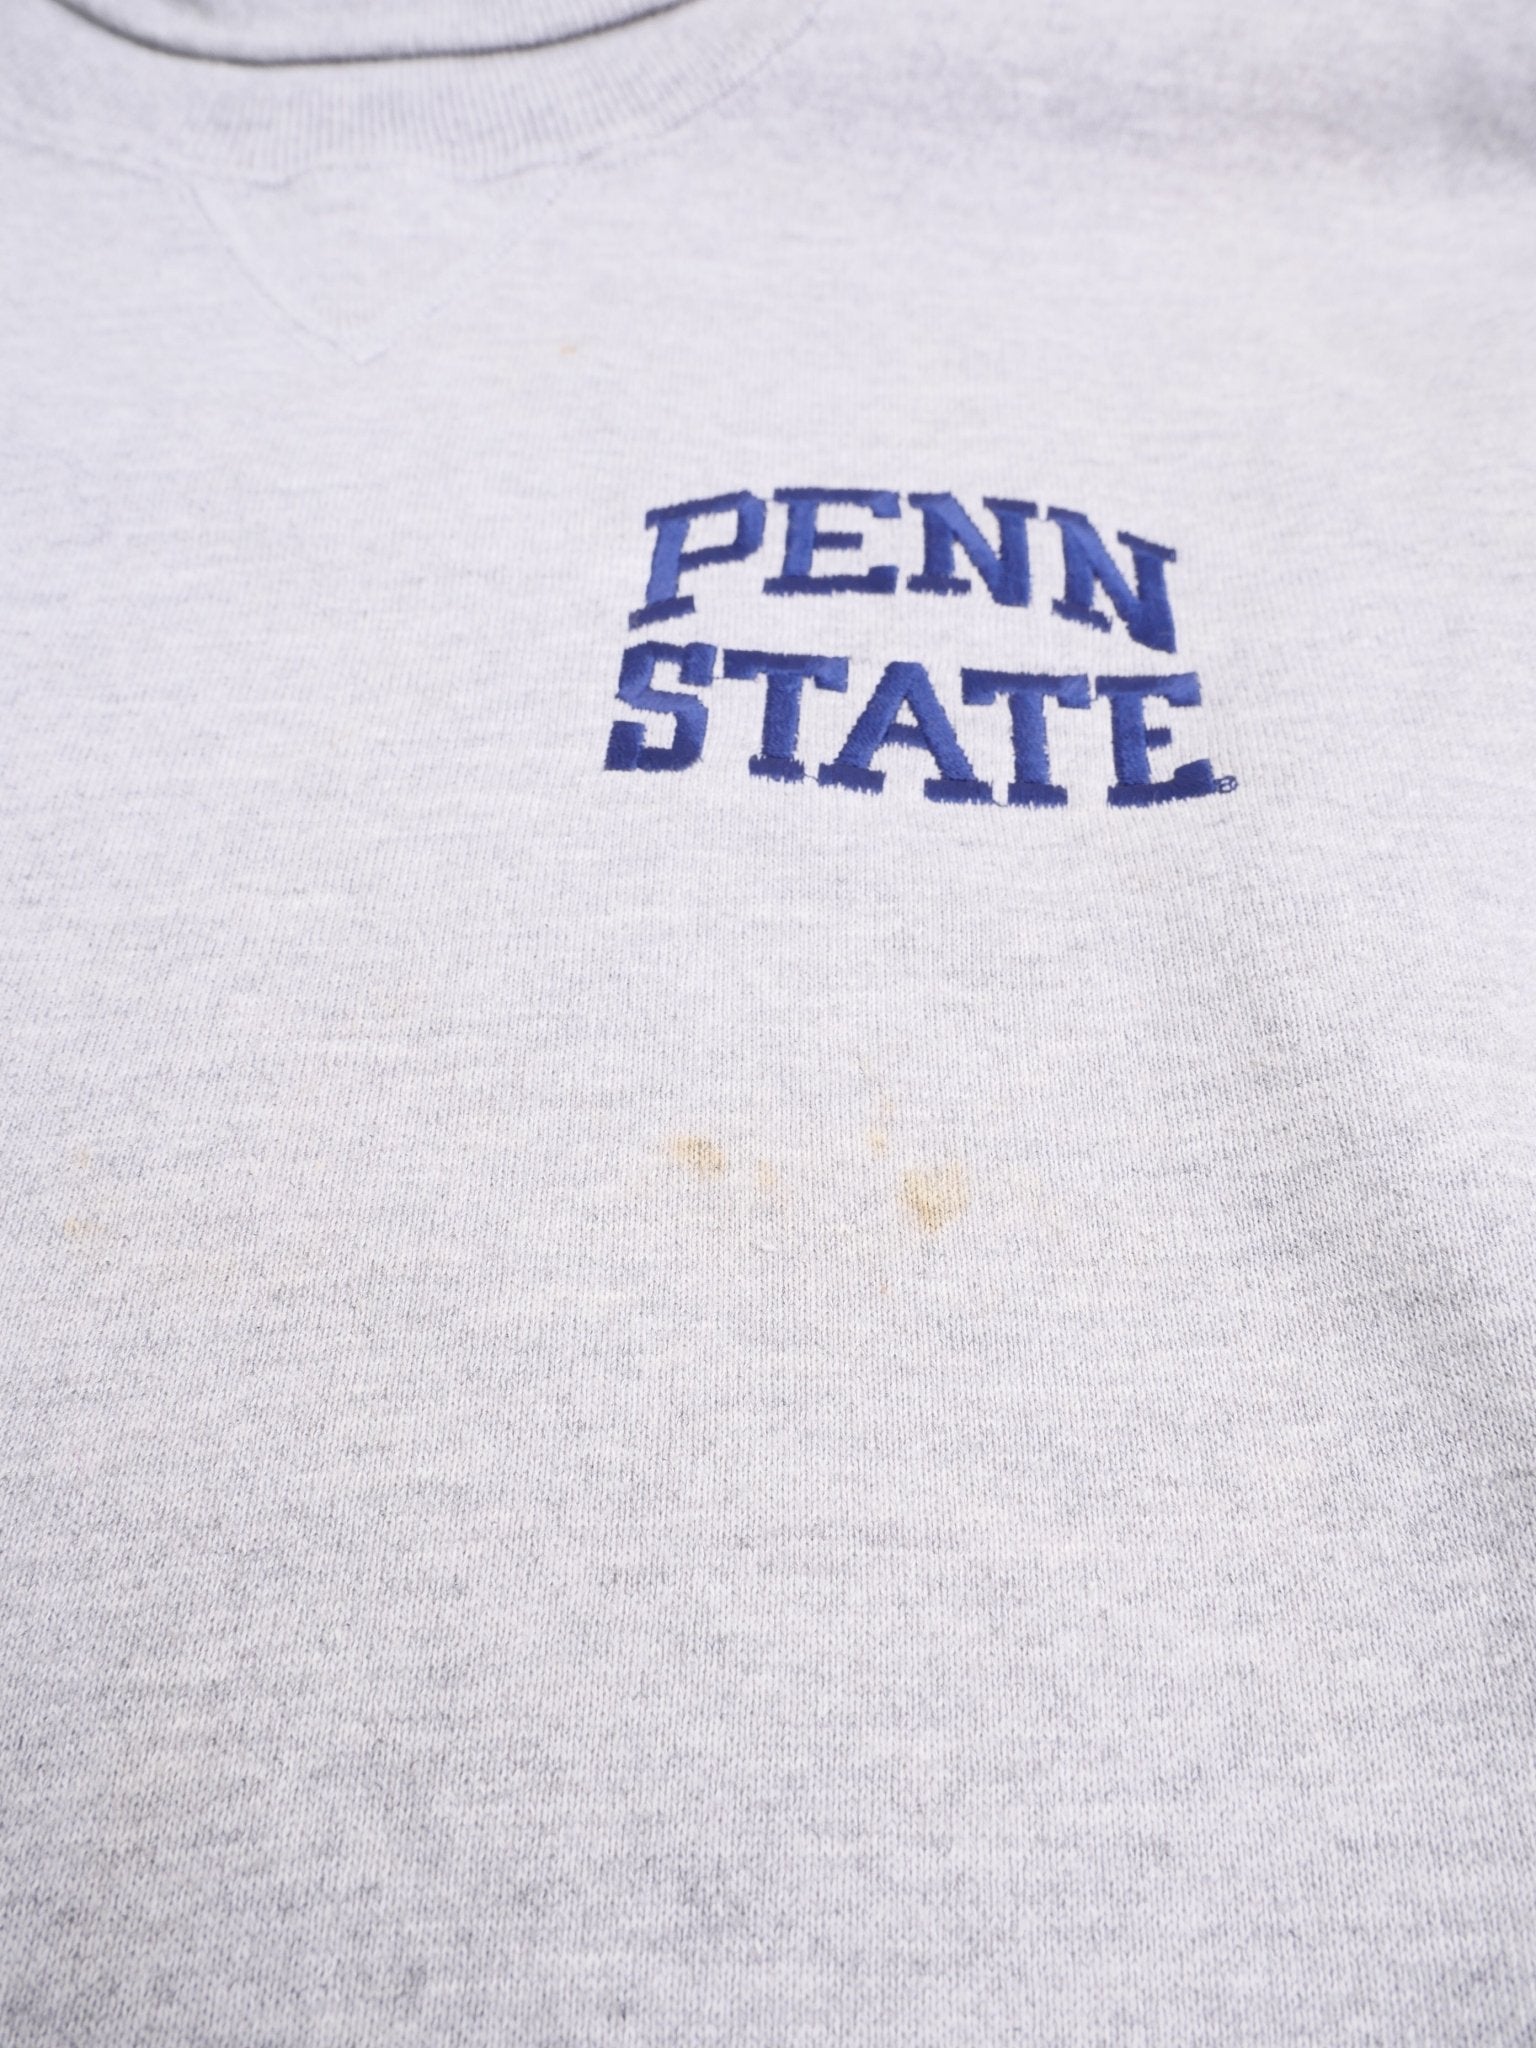 Russell Athletic Pennsylvania State University embroidered Logo Vintage Turtle Neck Sweater - Peeces